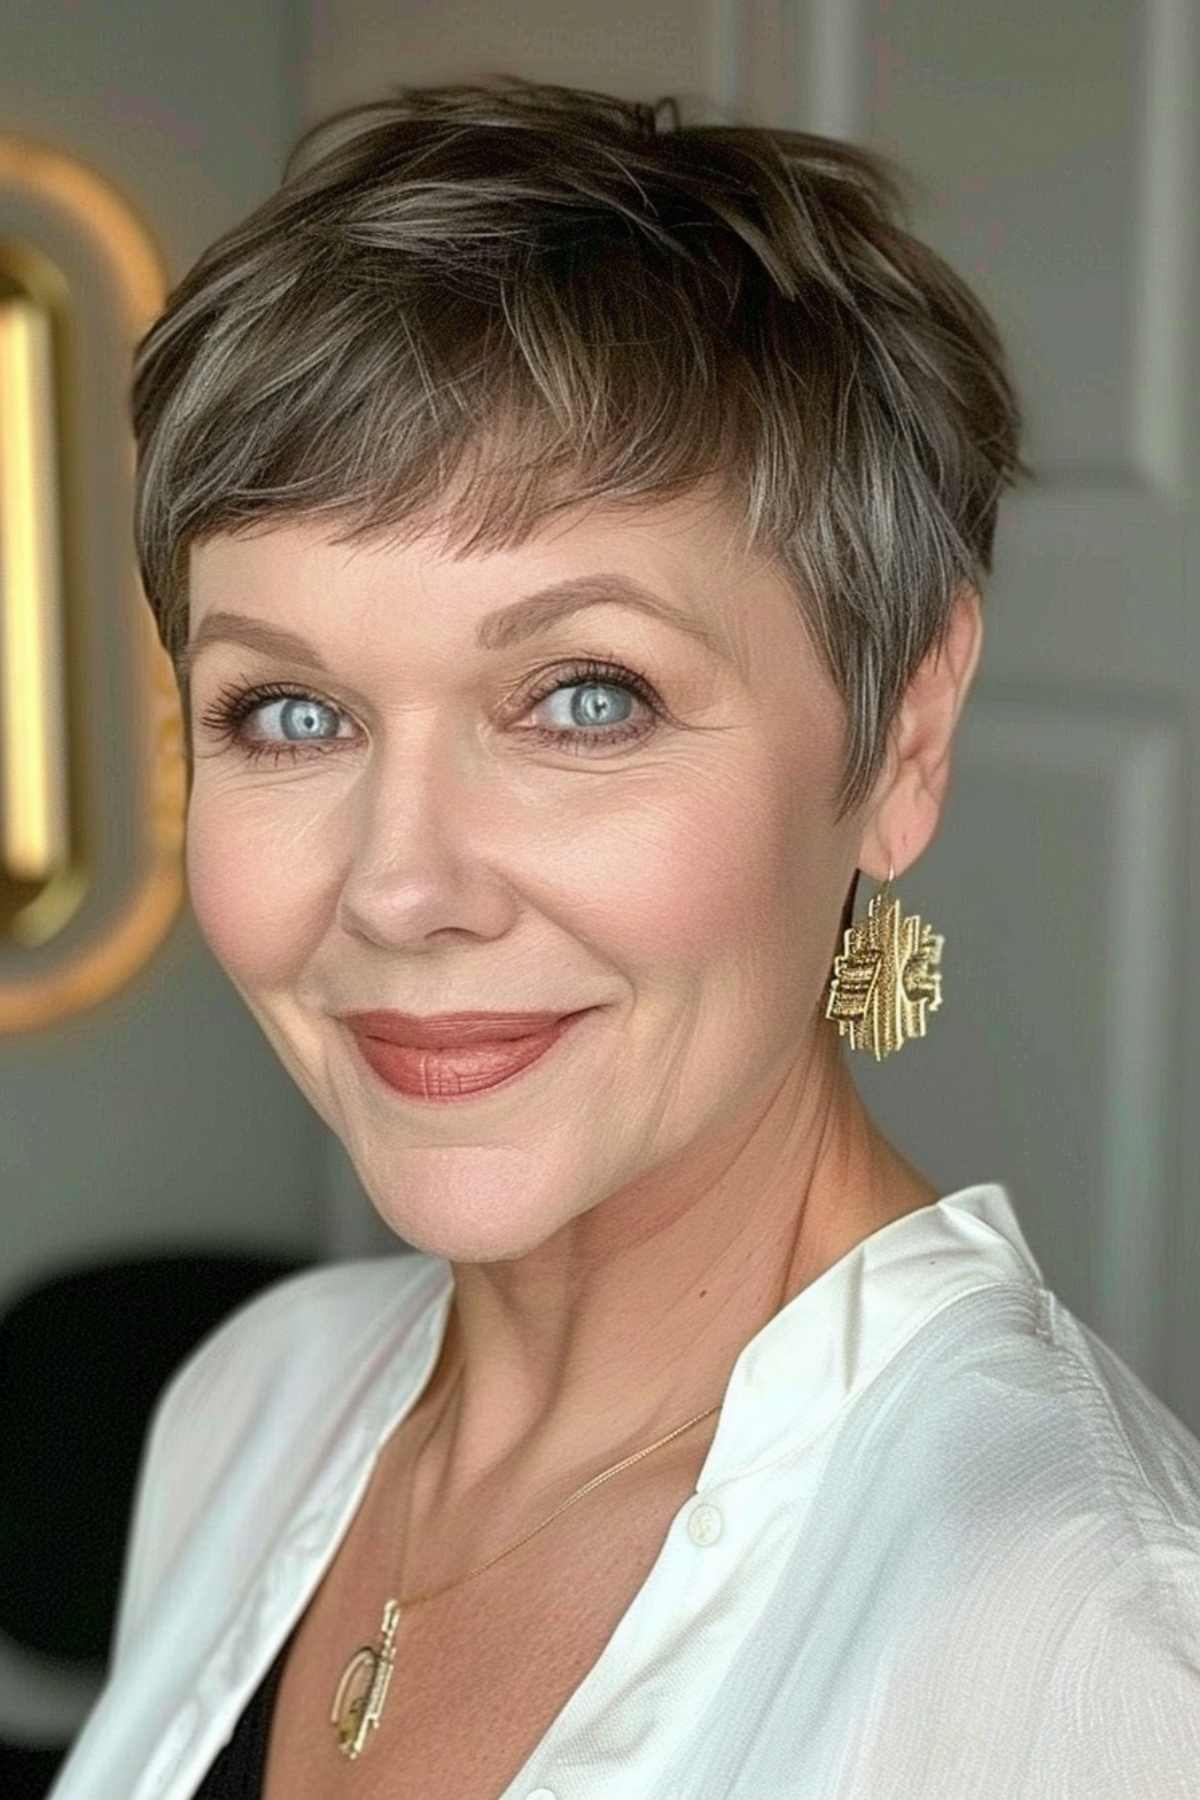 Woman with a sleek pixie cut featuring choppy layers, subtle lowlights, and a short fringe.